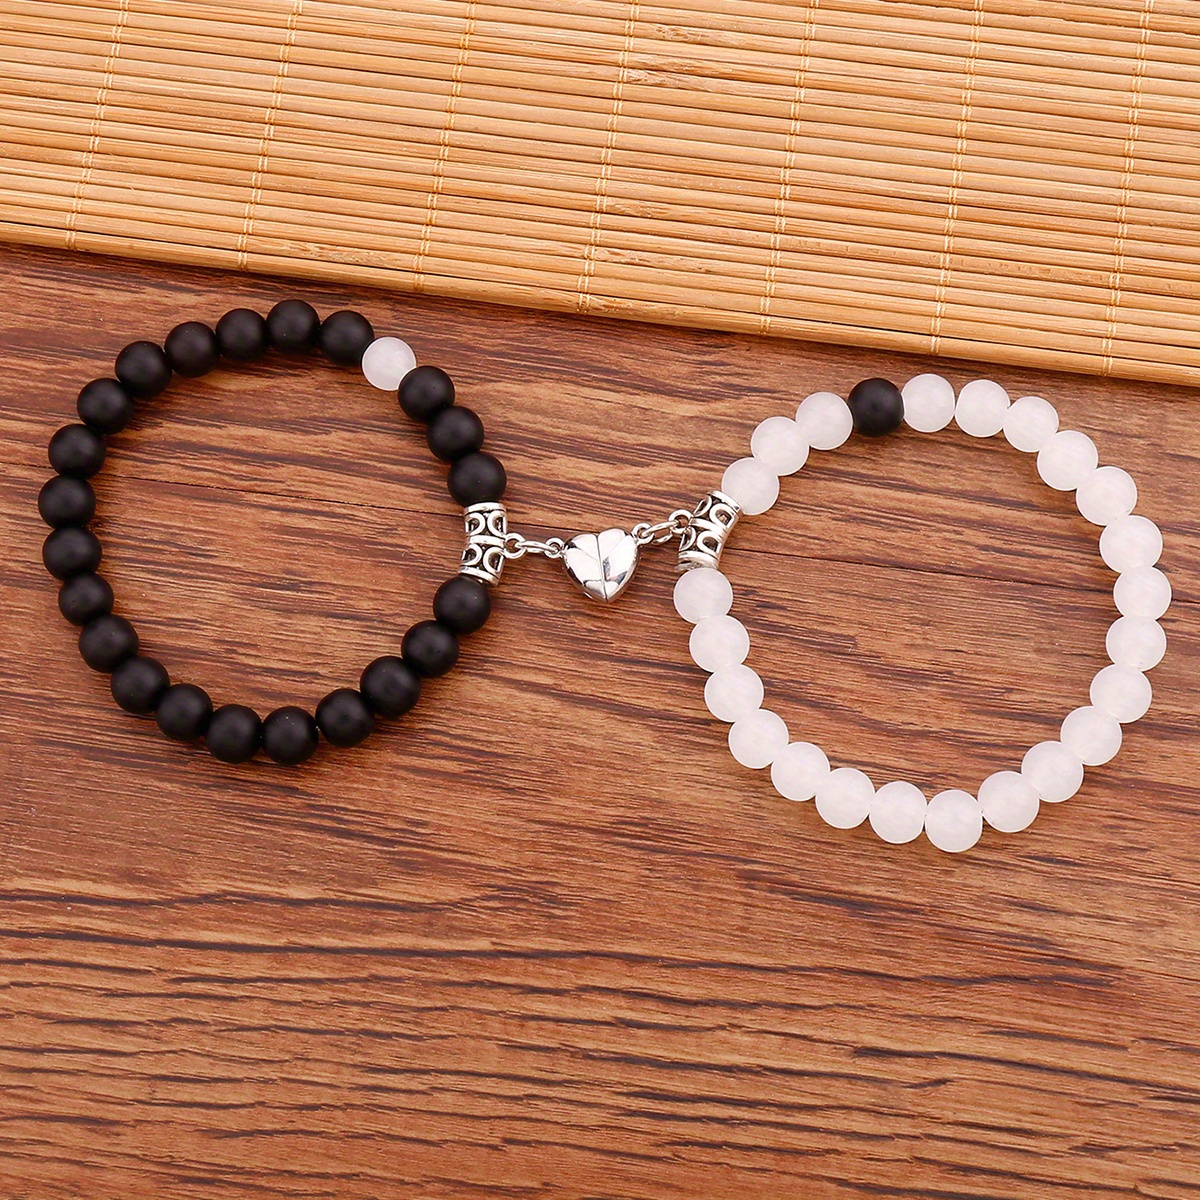 heart beads bracelet for couple friendship bands at Rs 60/piece, New Delhi